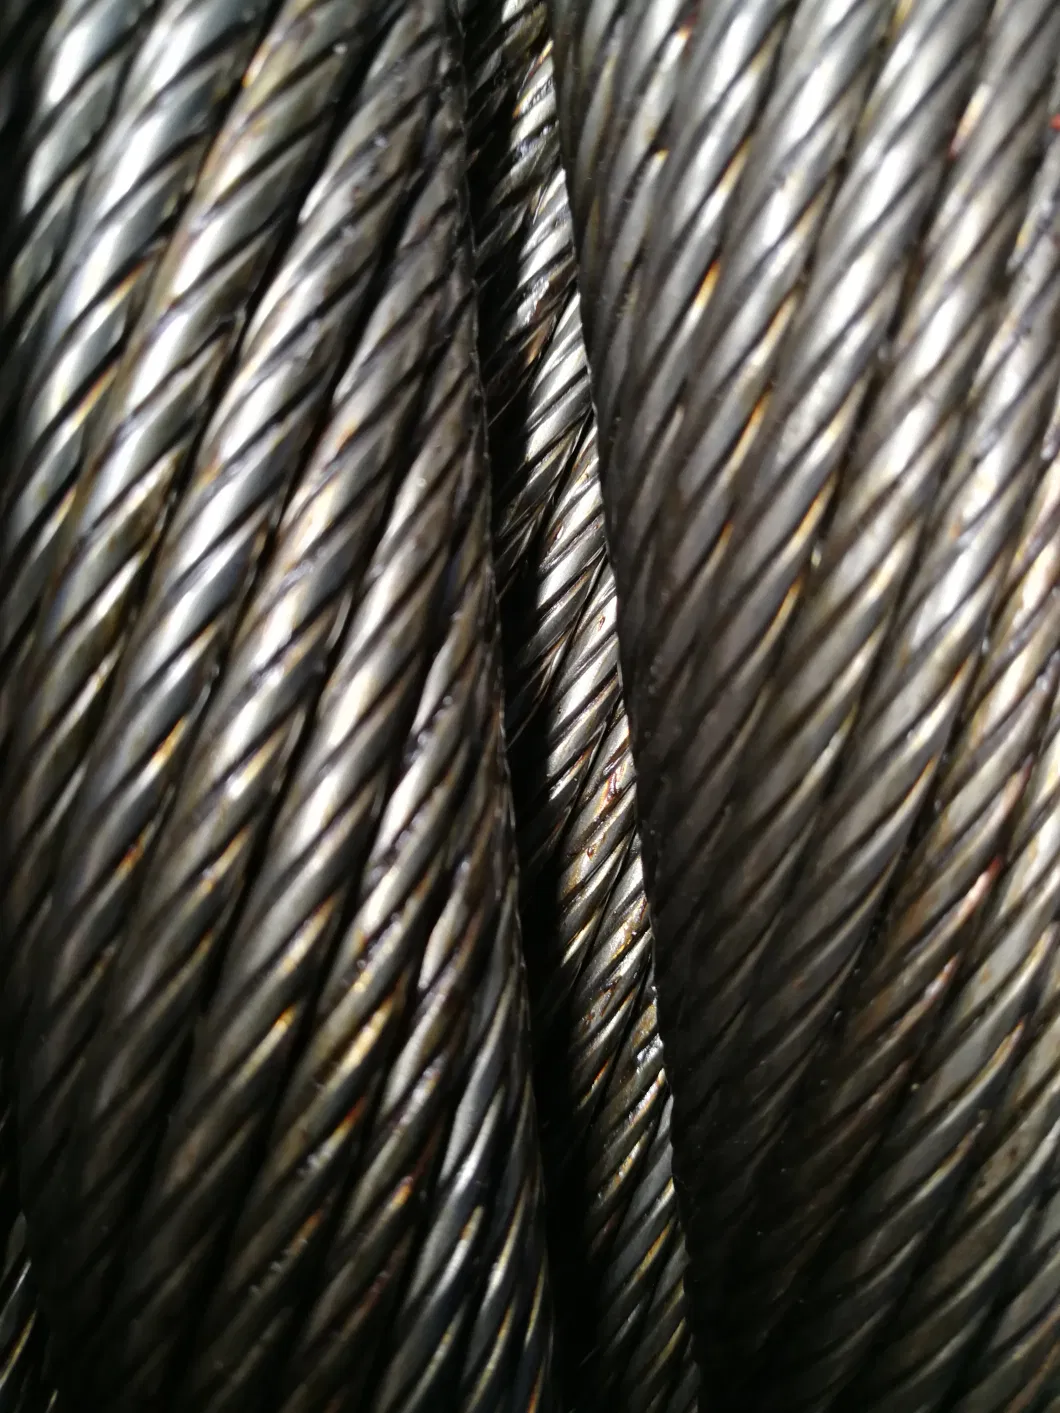 Compacted Wire Rope 35wxk7 32mm Rotation Resistant, Rhll, Lhll, Factory Price, Distributor and Wholesaler